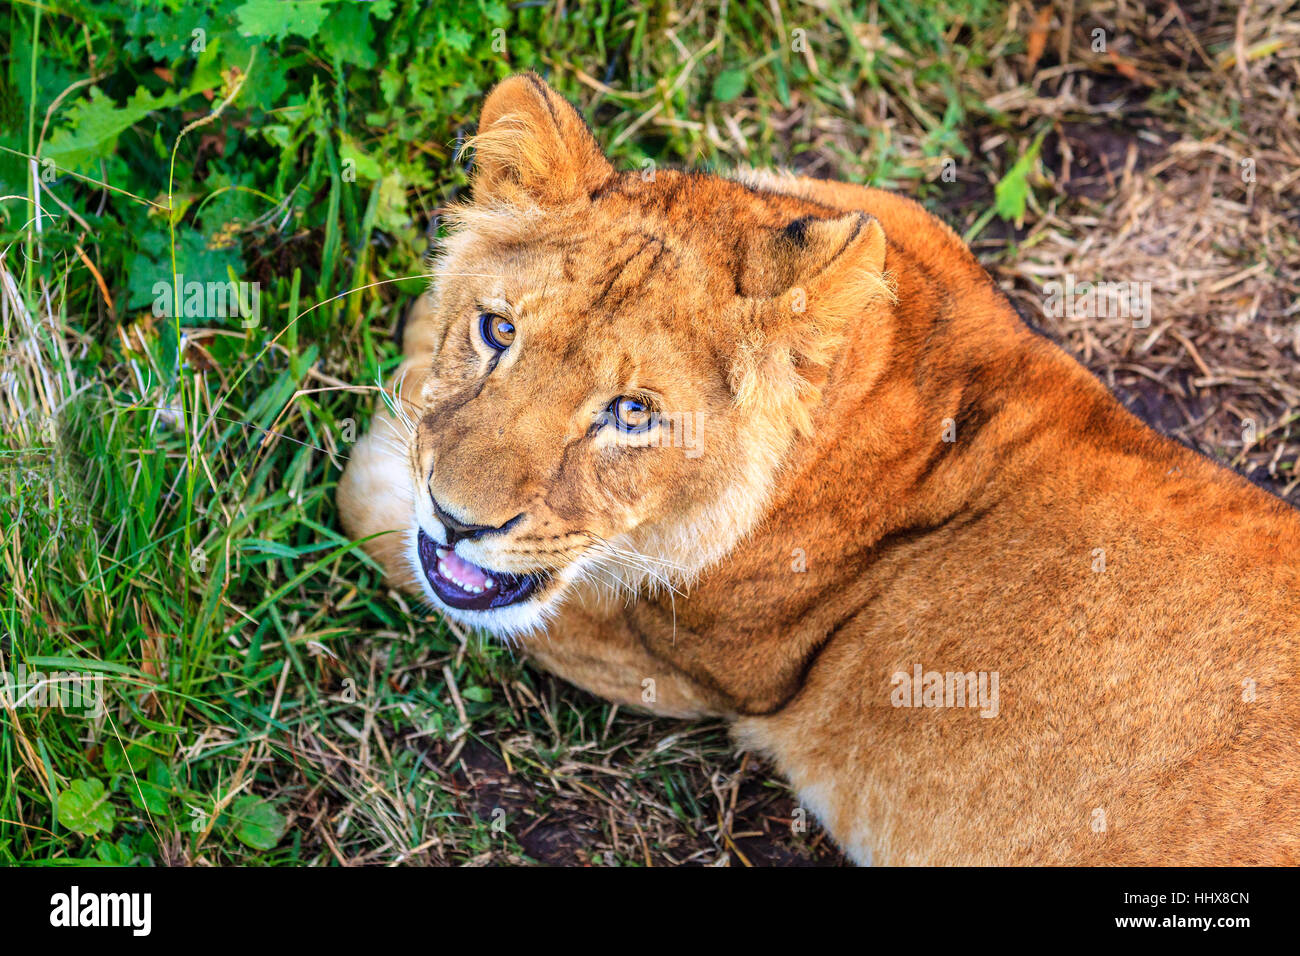 White lioness cub at wildlife sanctuary near Plettenberg Bay, South Africa Stock Photo